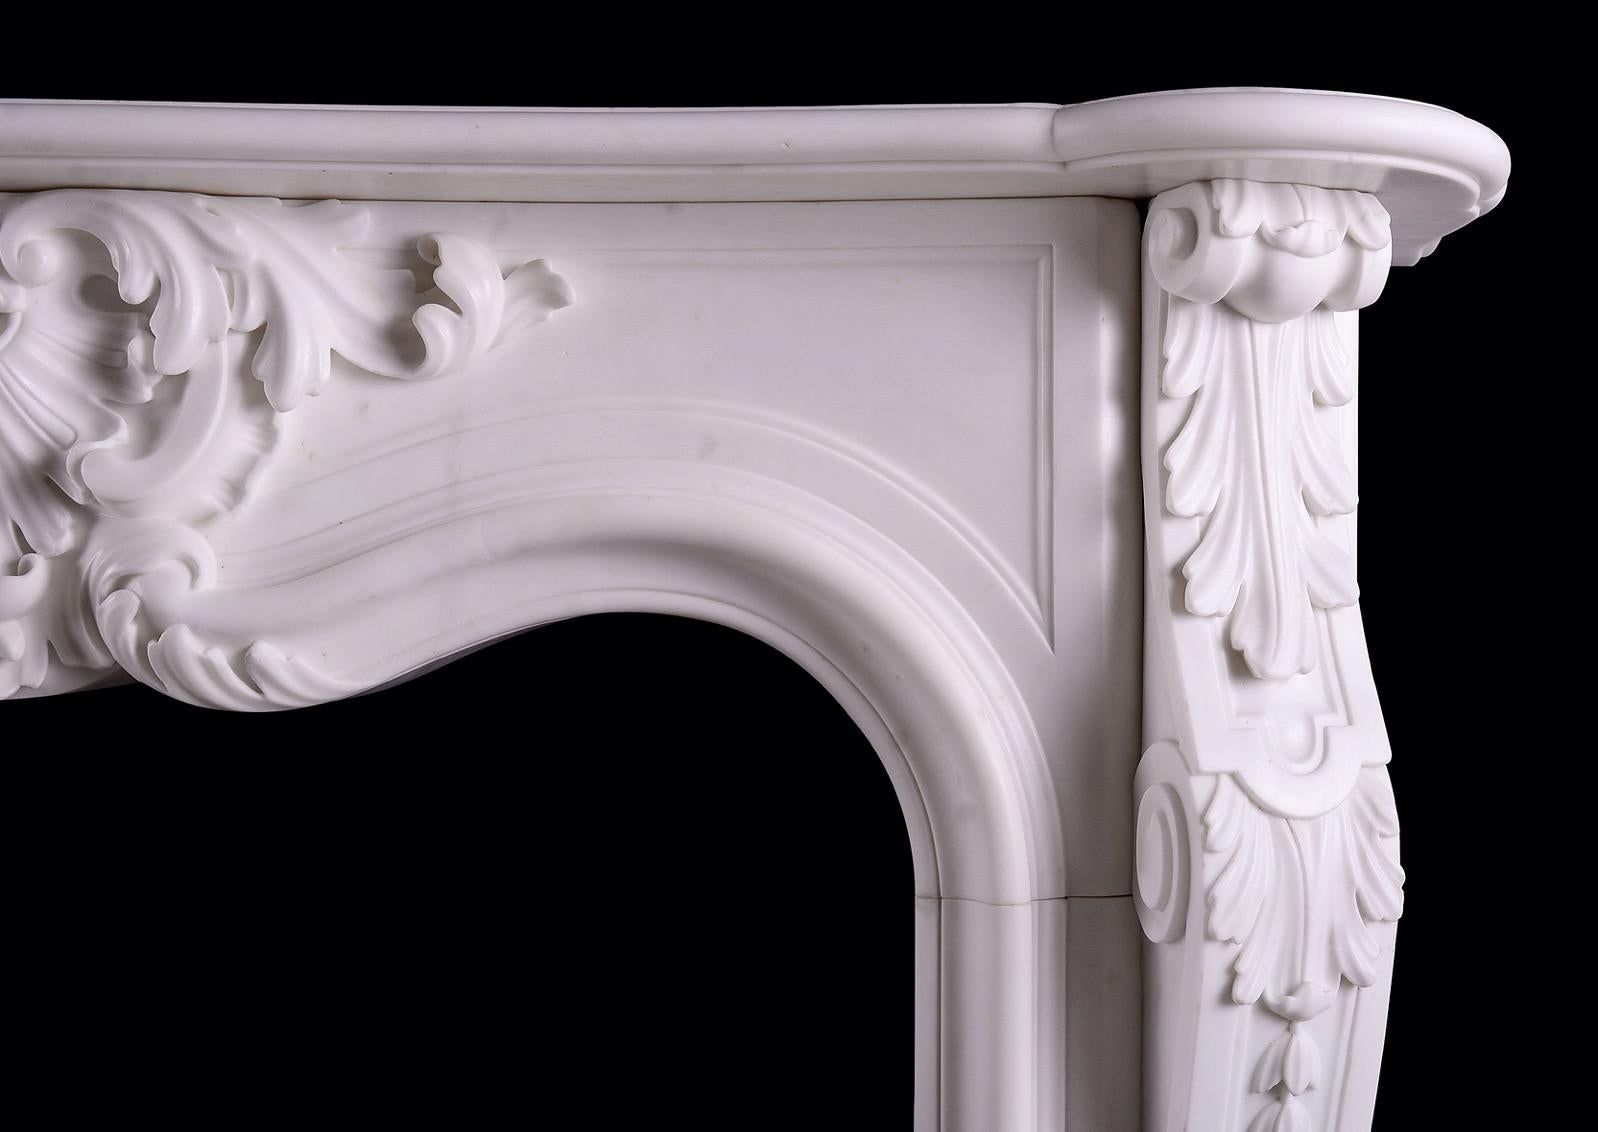 19th Century Period Regency Statuary Marble Fireplace For Sale